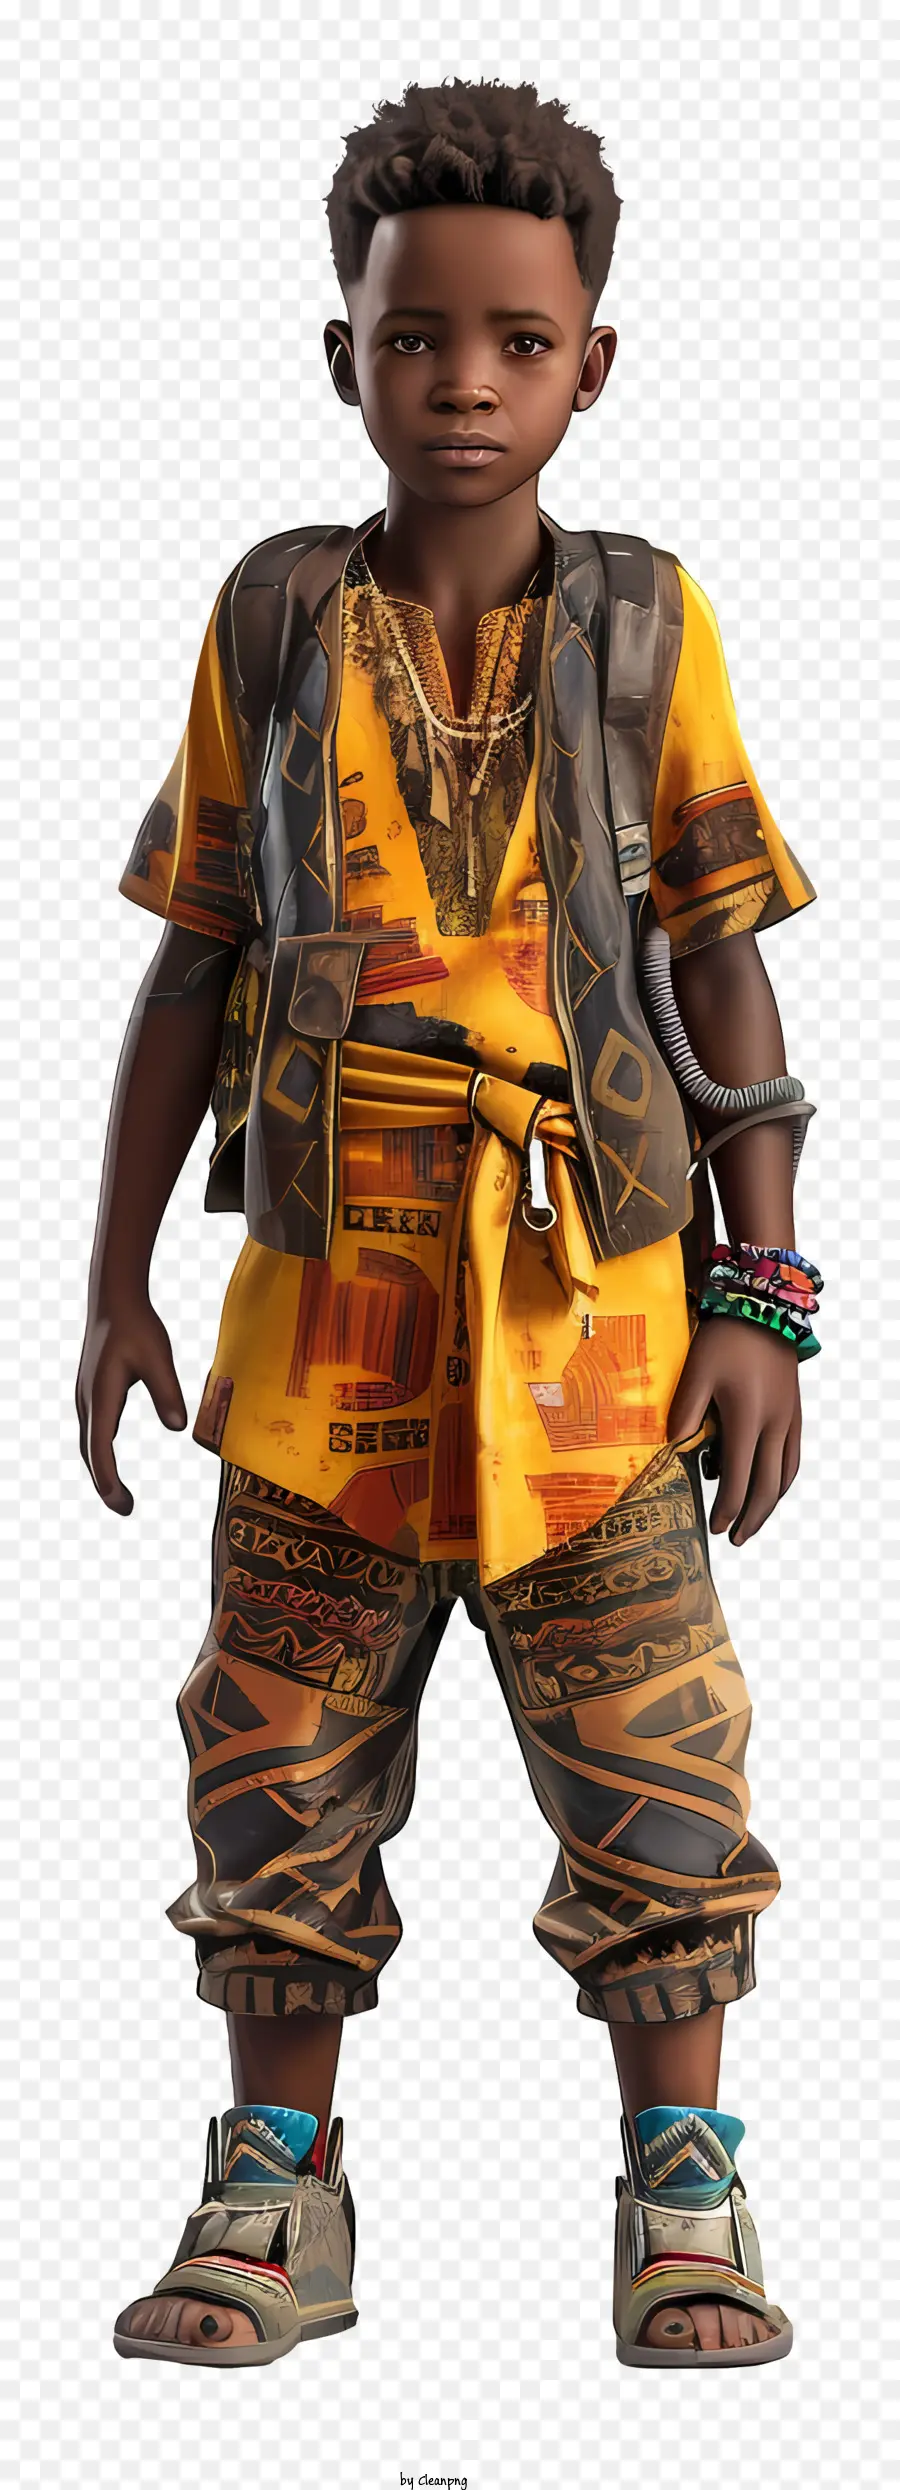 african boy african fashion bright yellow clothing african-inspired outfit fashion photography